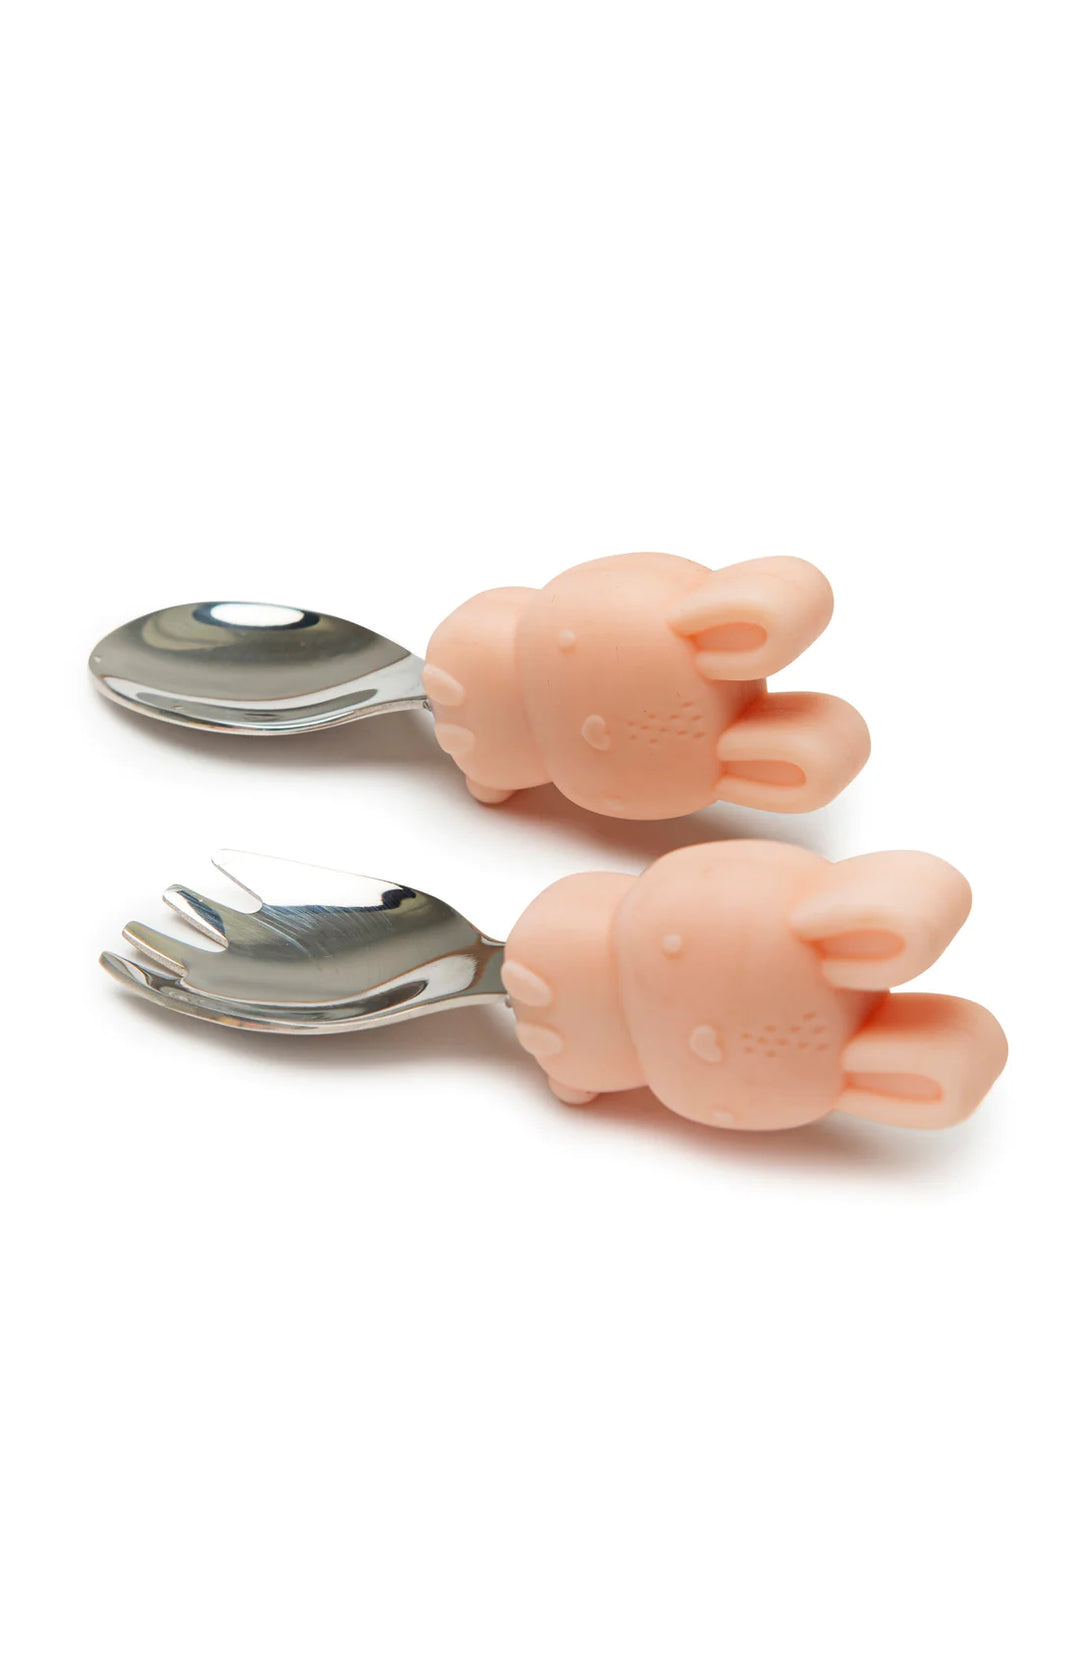 Bunny Learning Spoon and Fork Set by Loulou Lollipop